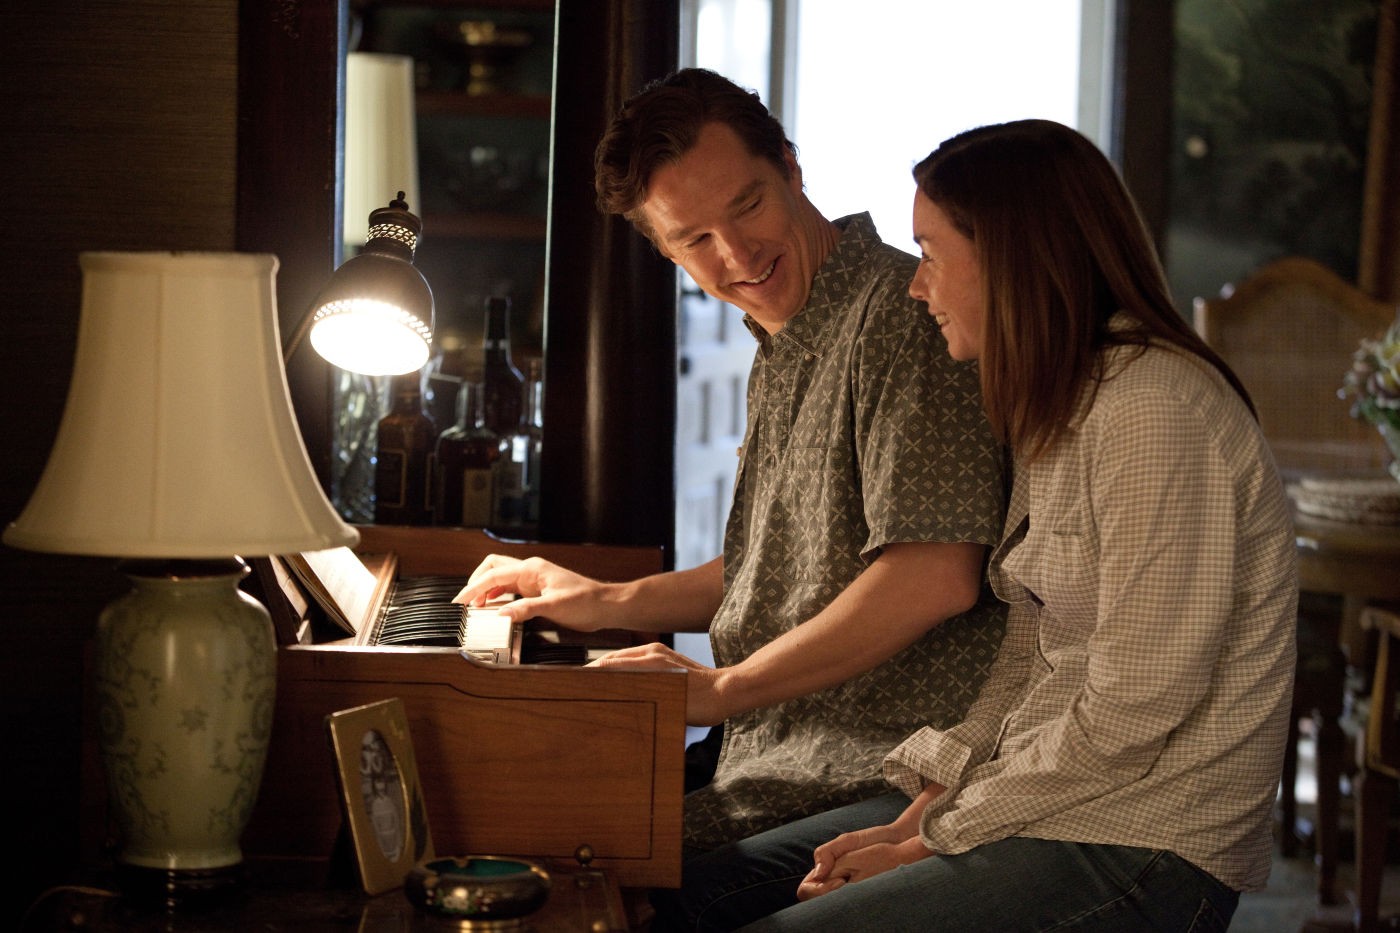 Benedict Cumberbatch stars as Little Charles Aiken and Julianne Nicholson stars as Ivy Weston in The Weinstein Company's August: Osage County (2013)